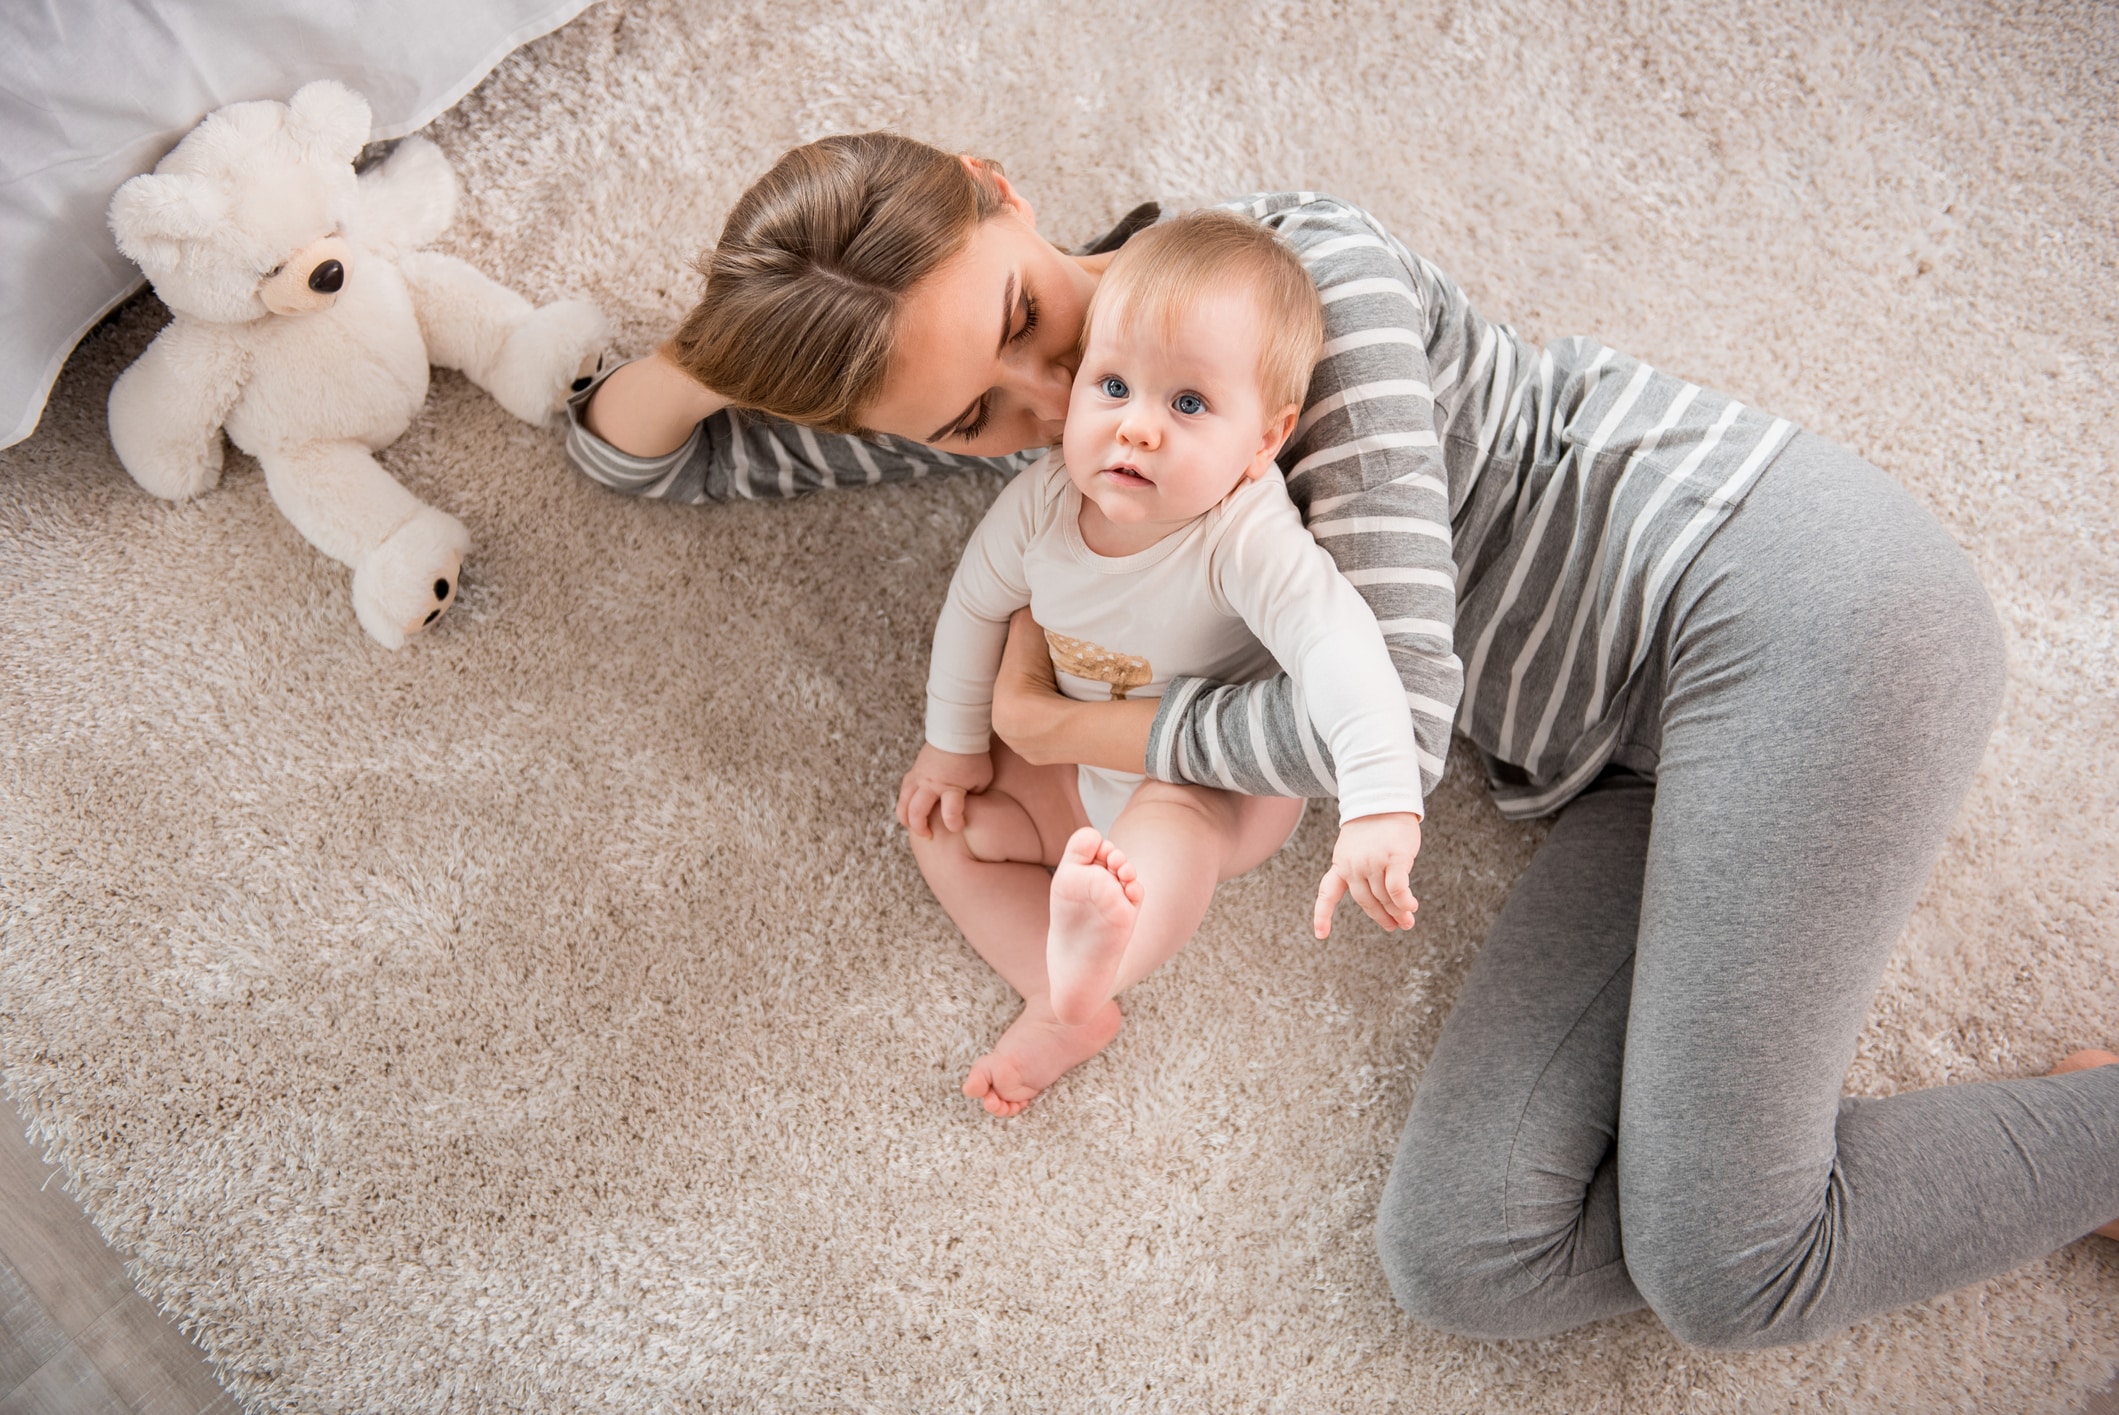 Baby Concussion Signs And What To Do, Toddler Hit Back Of Head On Hardwood Floor